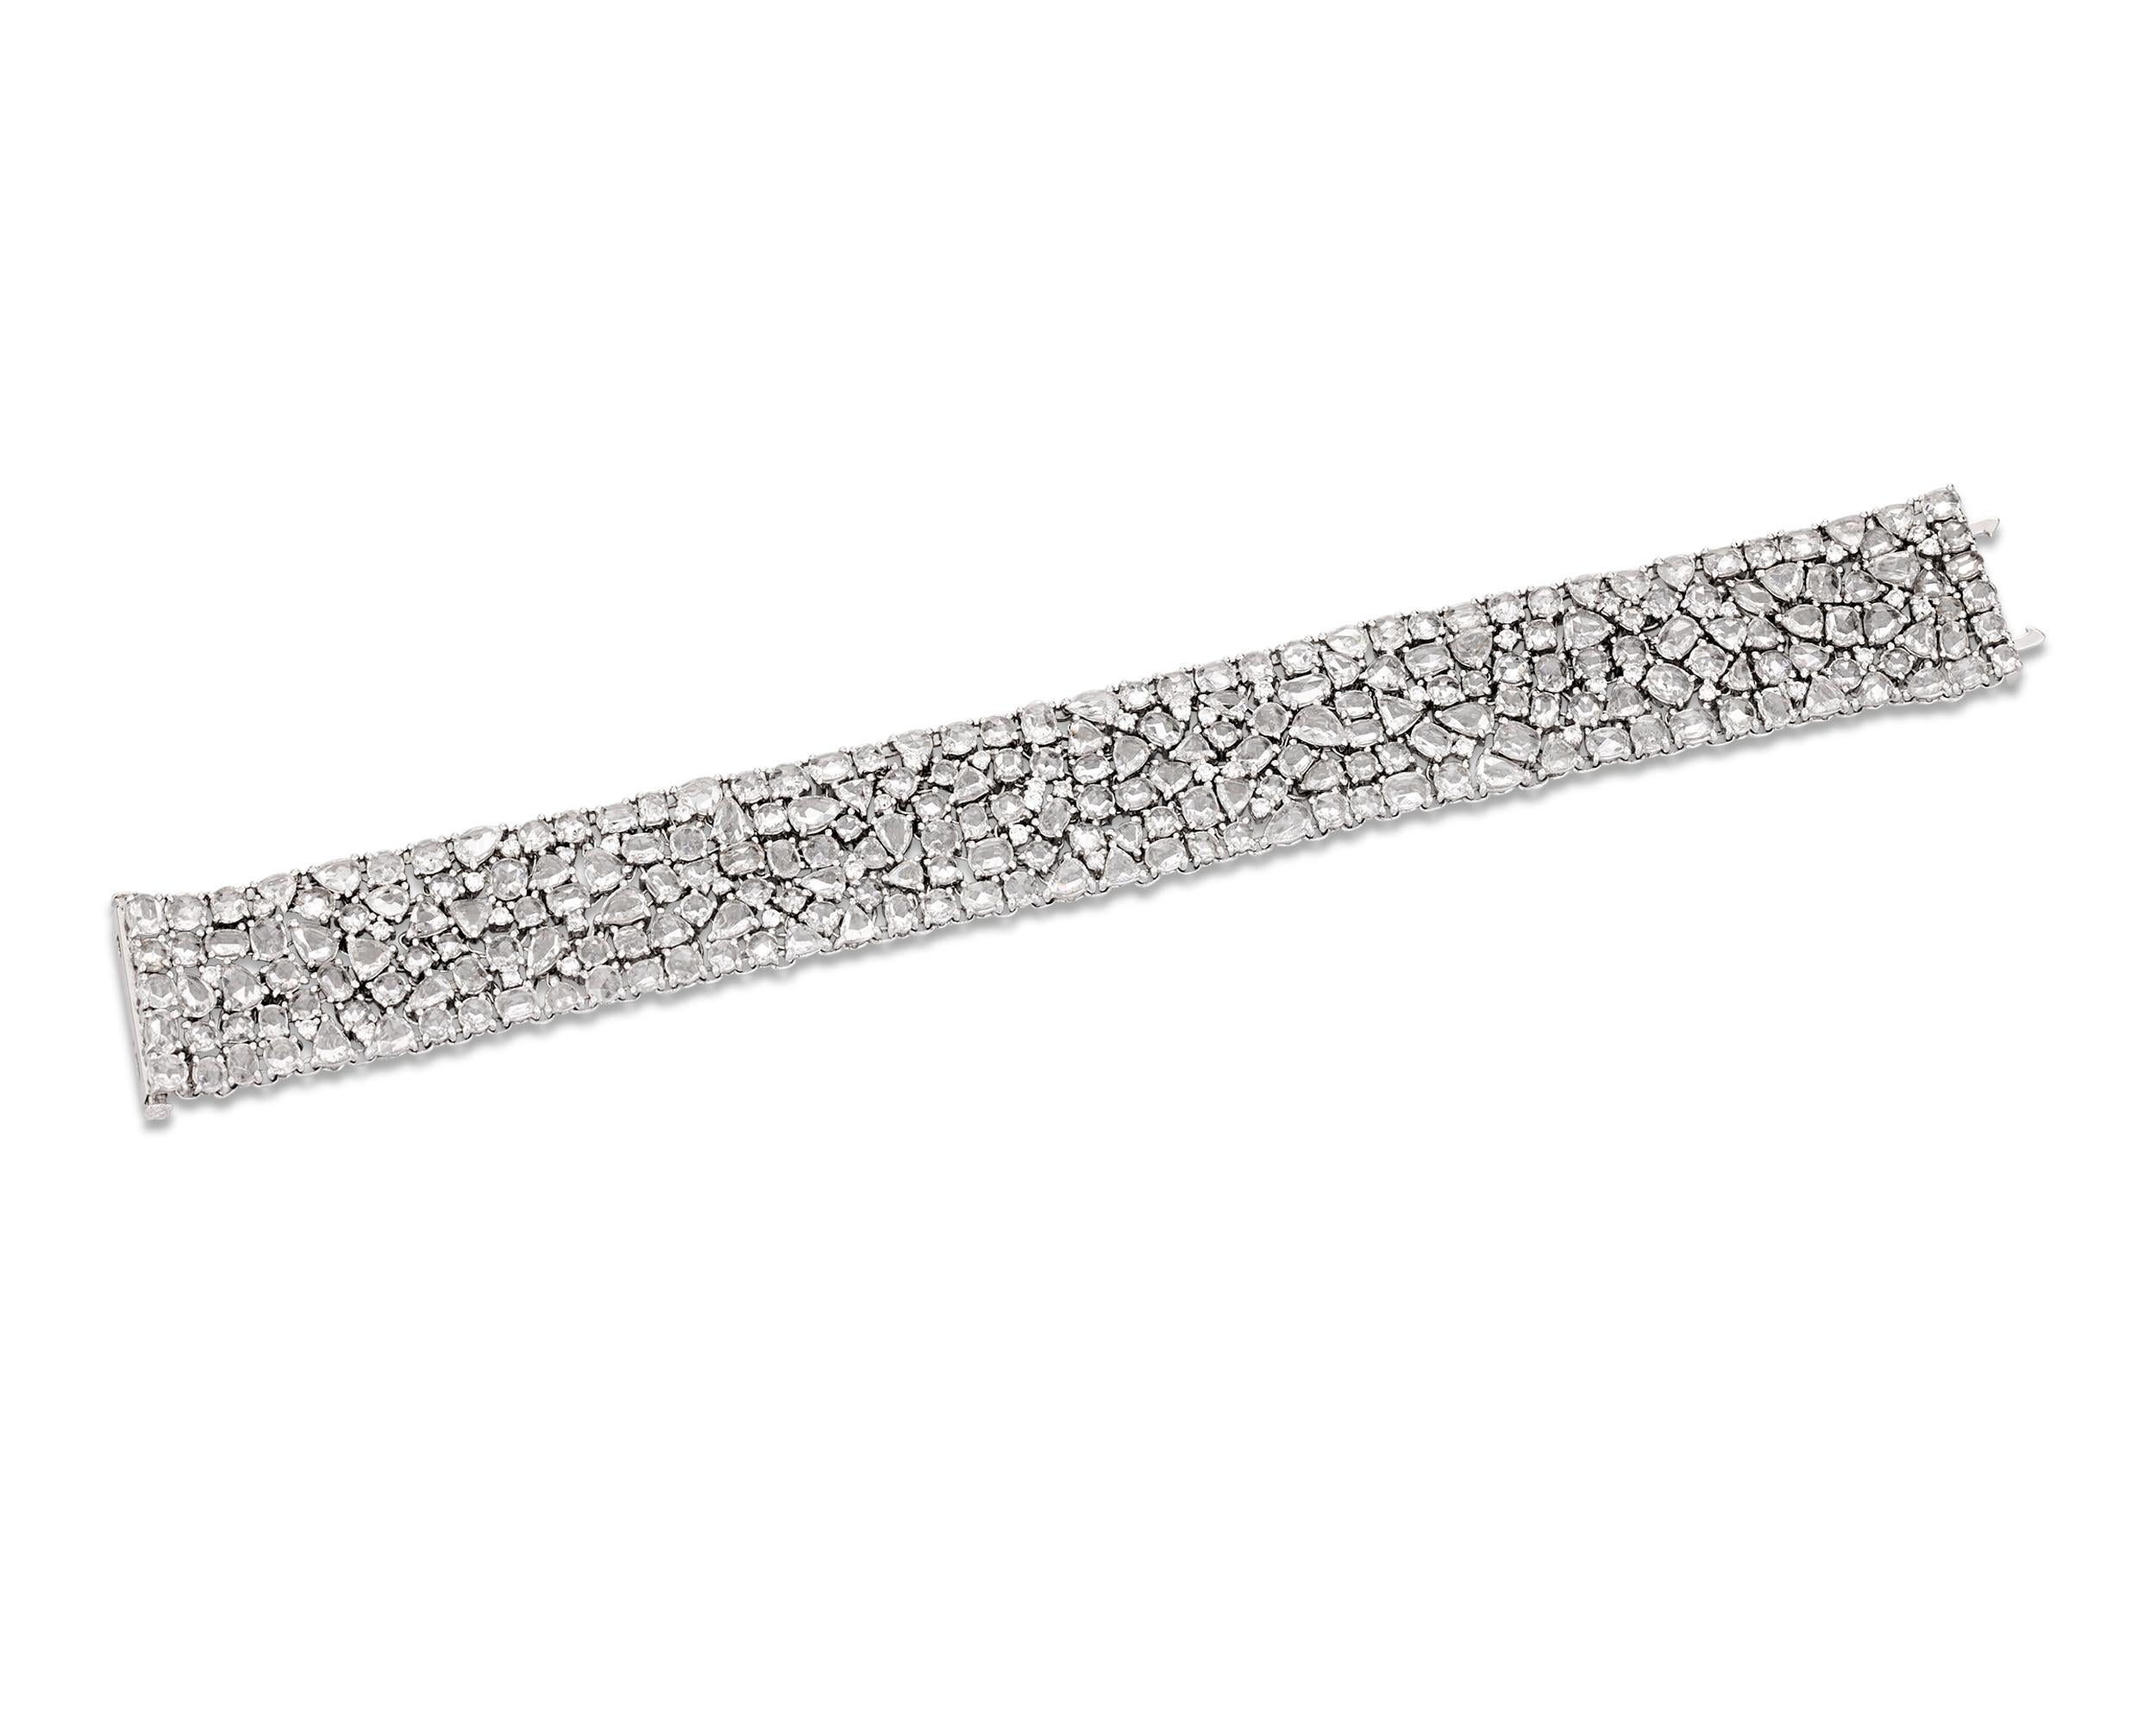 A marvelous array of 239 rose-cut diamonds cover this amazing 18K white gold bracelet. The jewels weigh a combined 22 carats and are cut in oval, pear, round, trilliant and other dazzling shapes that are meticulously fit together in a breathtaking